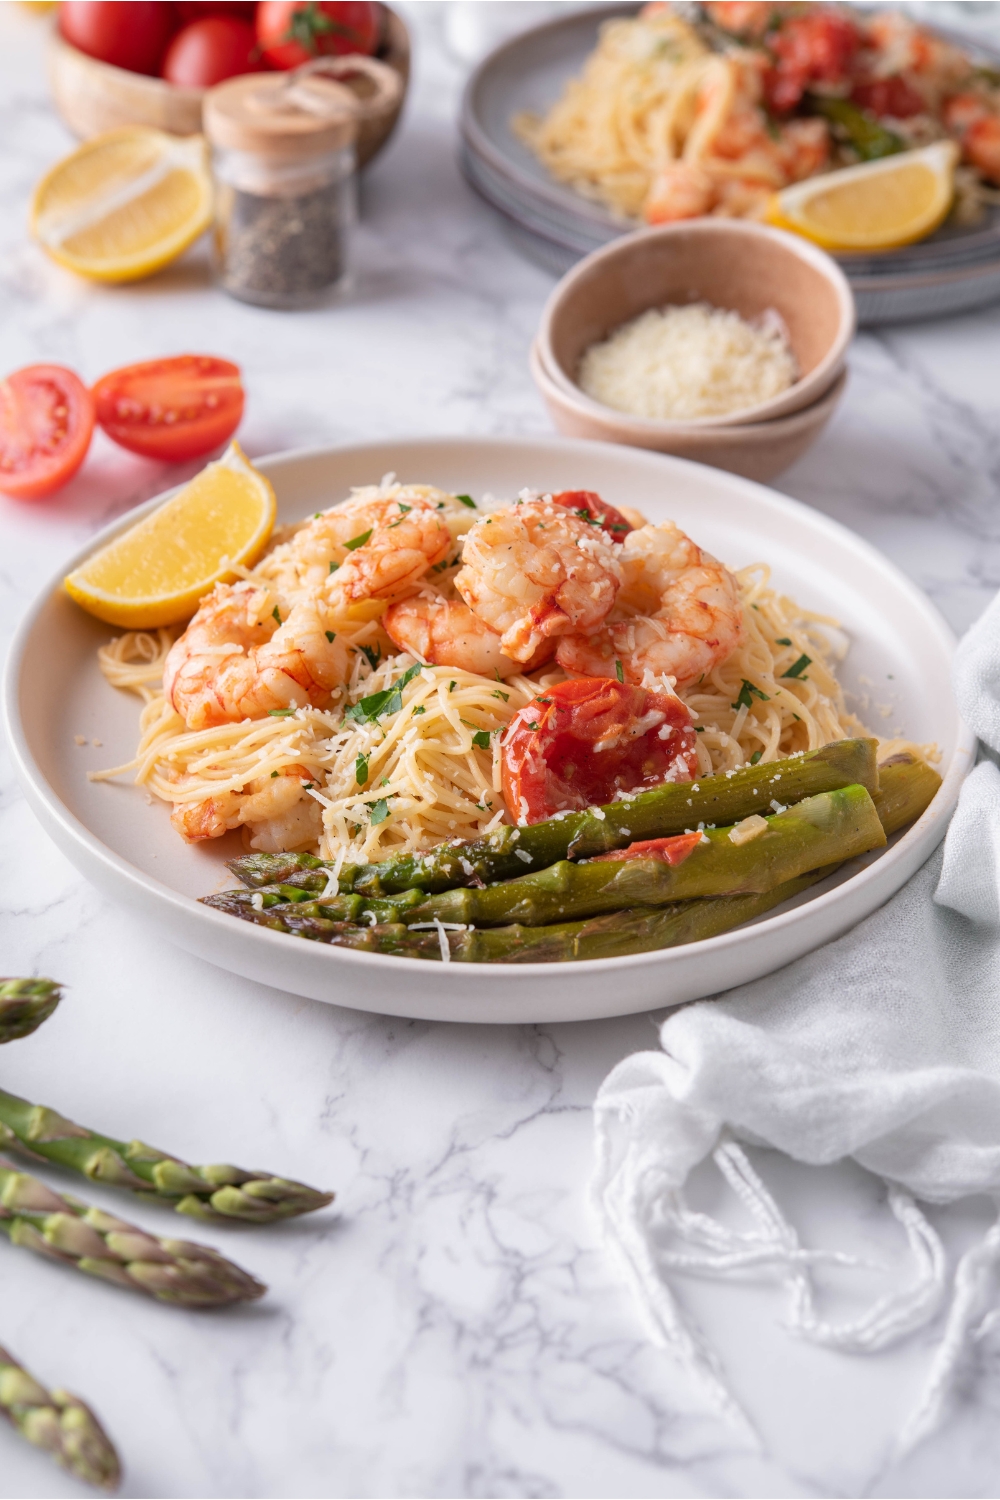 A plate of Olive Garden's shrimp scampi with sides of asparagus, cherry tomatoes, and a lemon wedge. The plate is surrounded by ingredients to make the recipe.